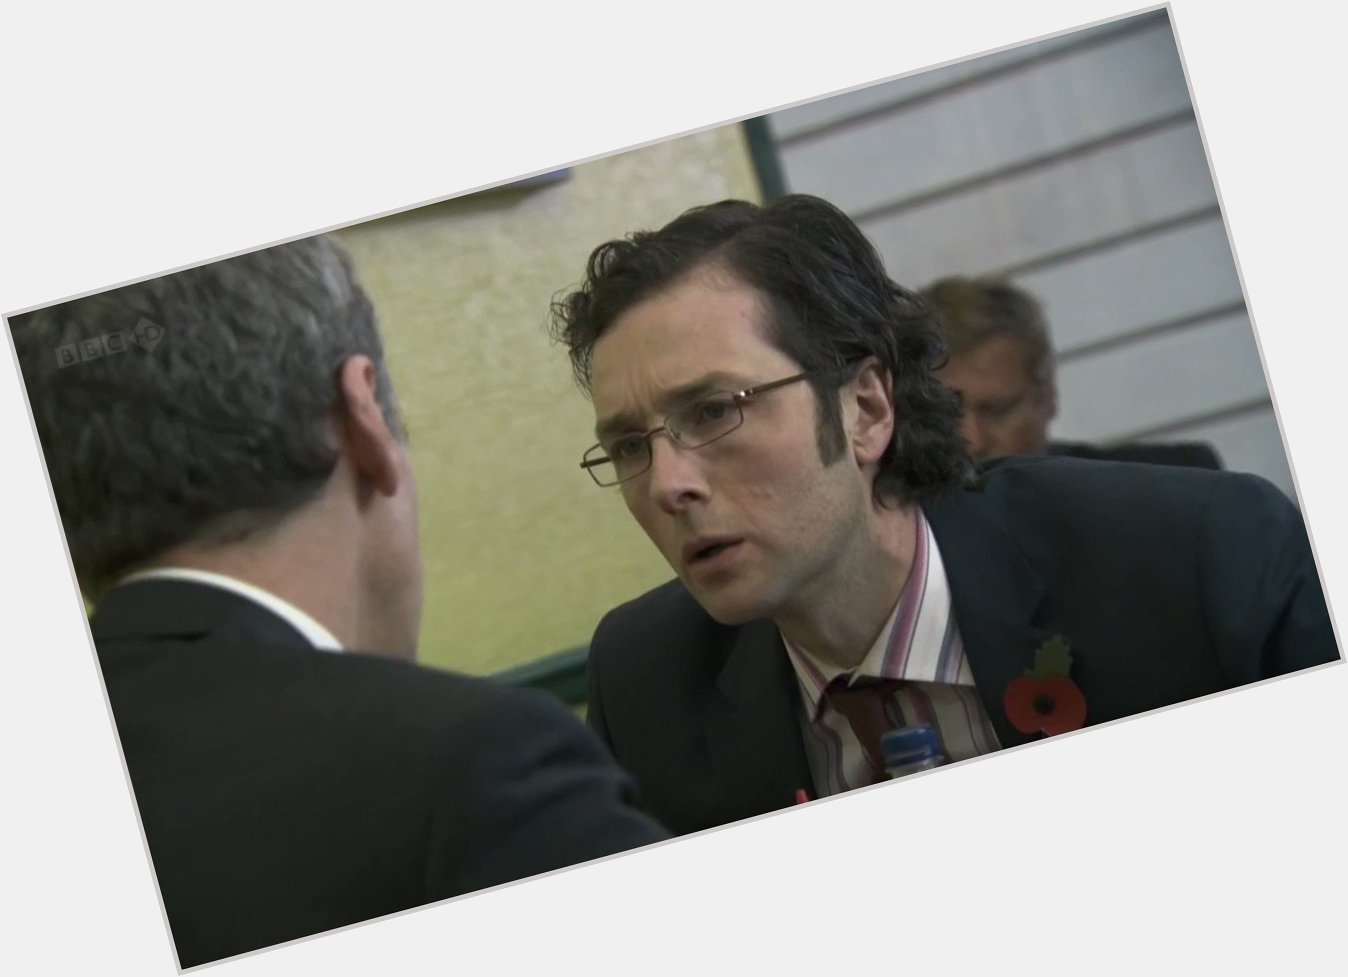 A happy 63rd birthday to Peter Capaldi.

Here\s one of his finest moments from The Thick of It 